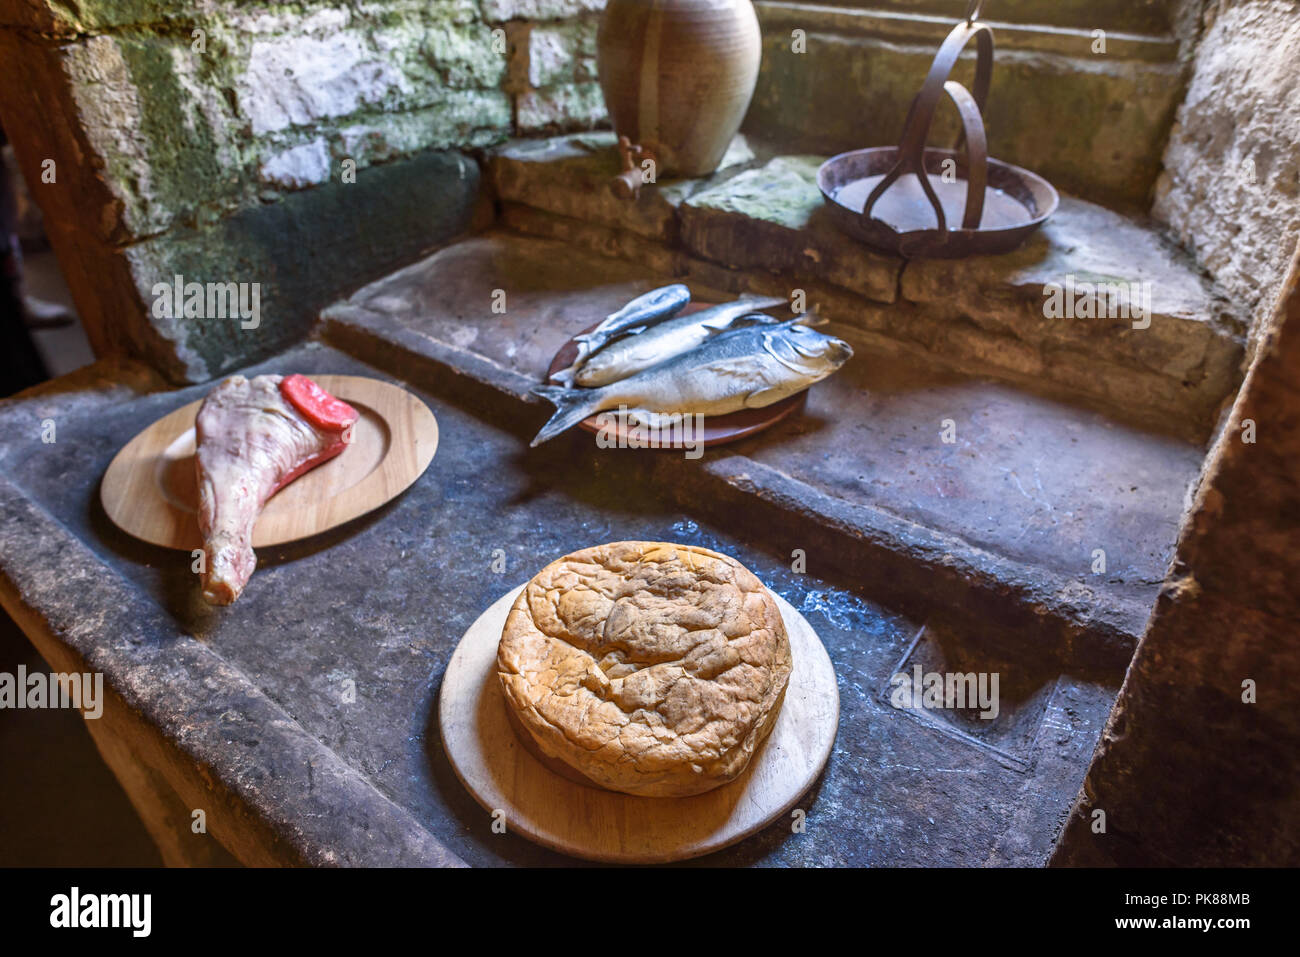 A still life of food eaten in medieval times inside the kitchen stone monastrey. Stock Photo